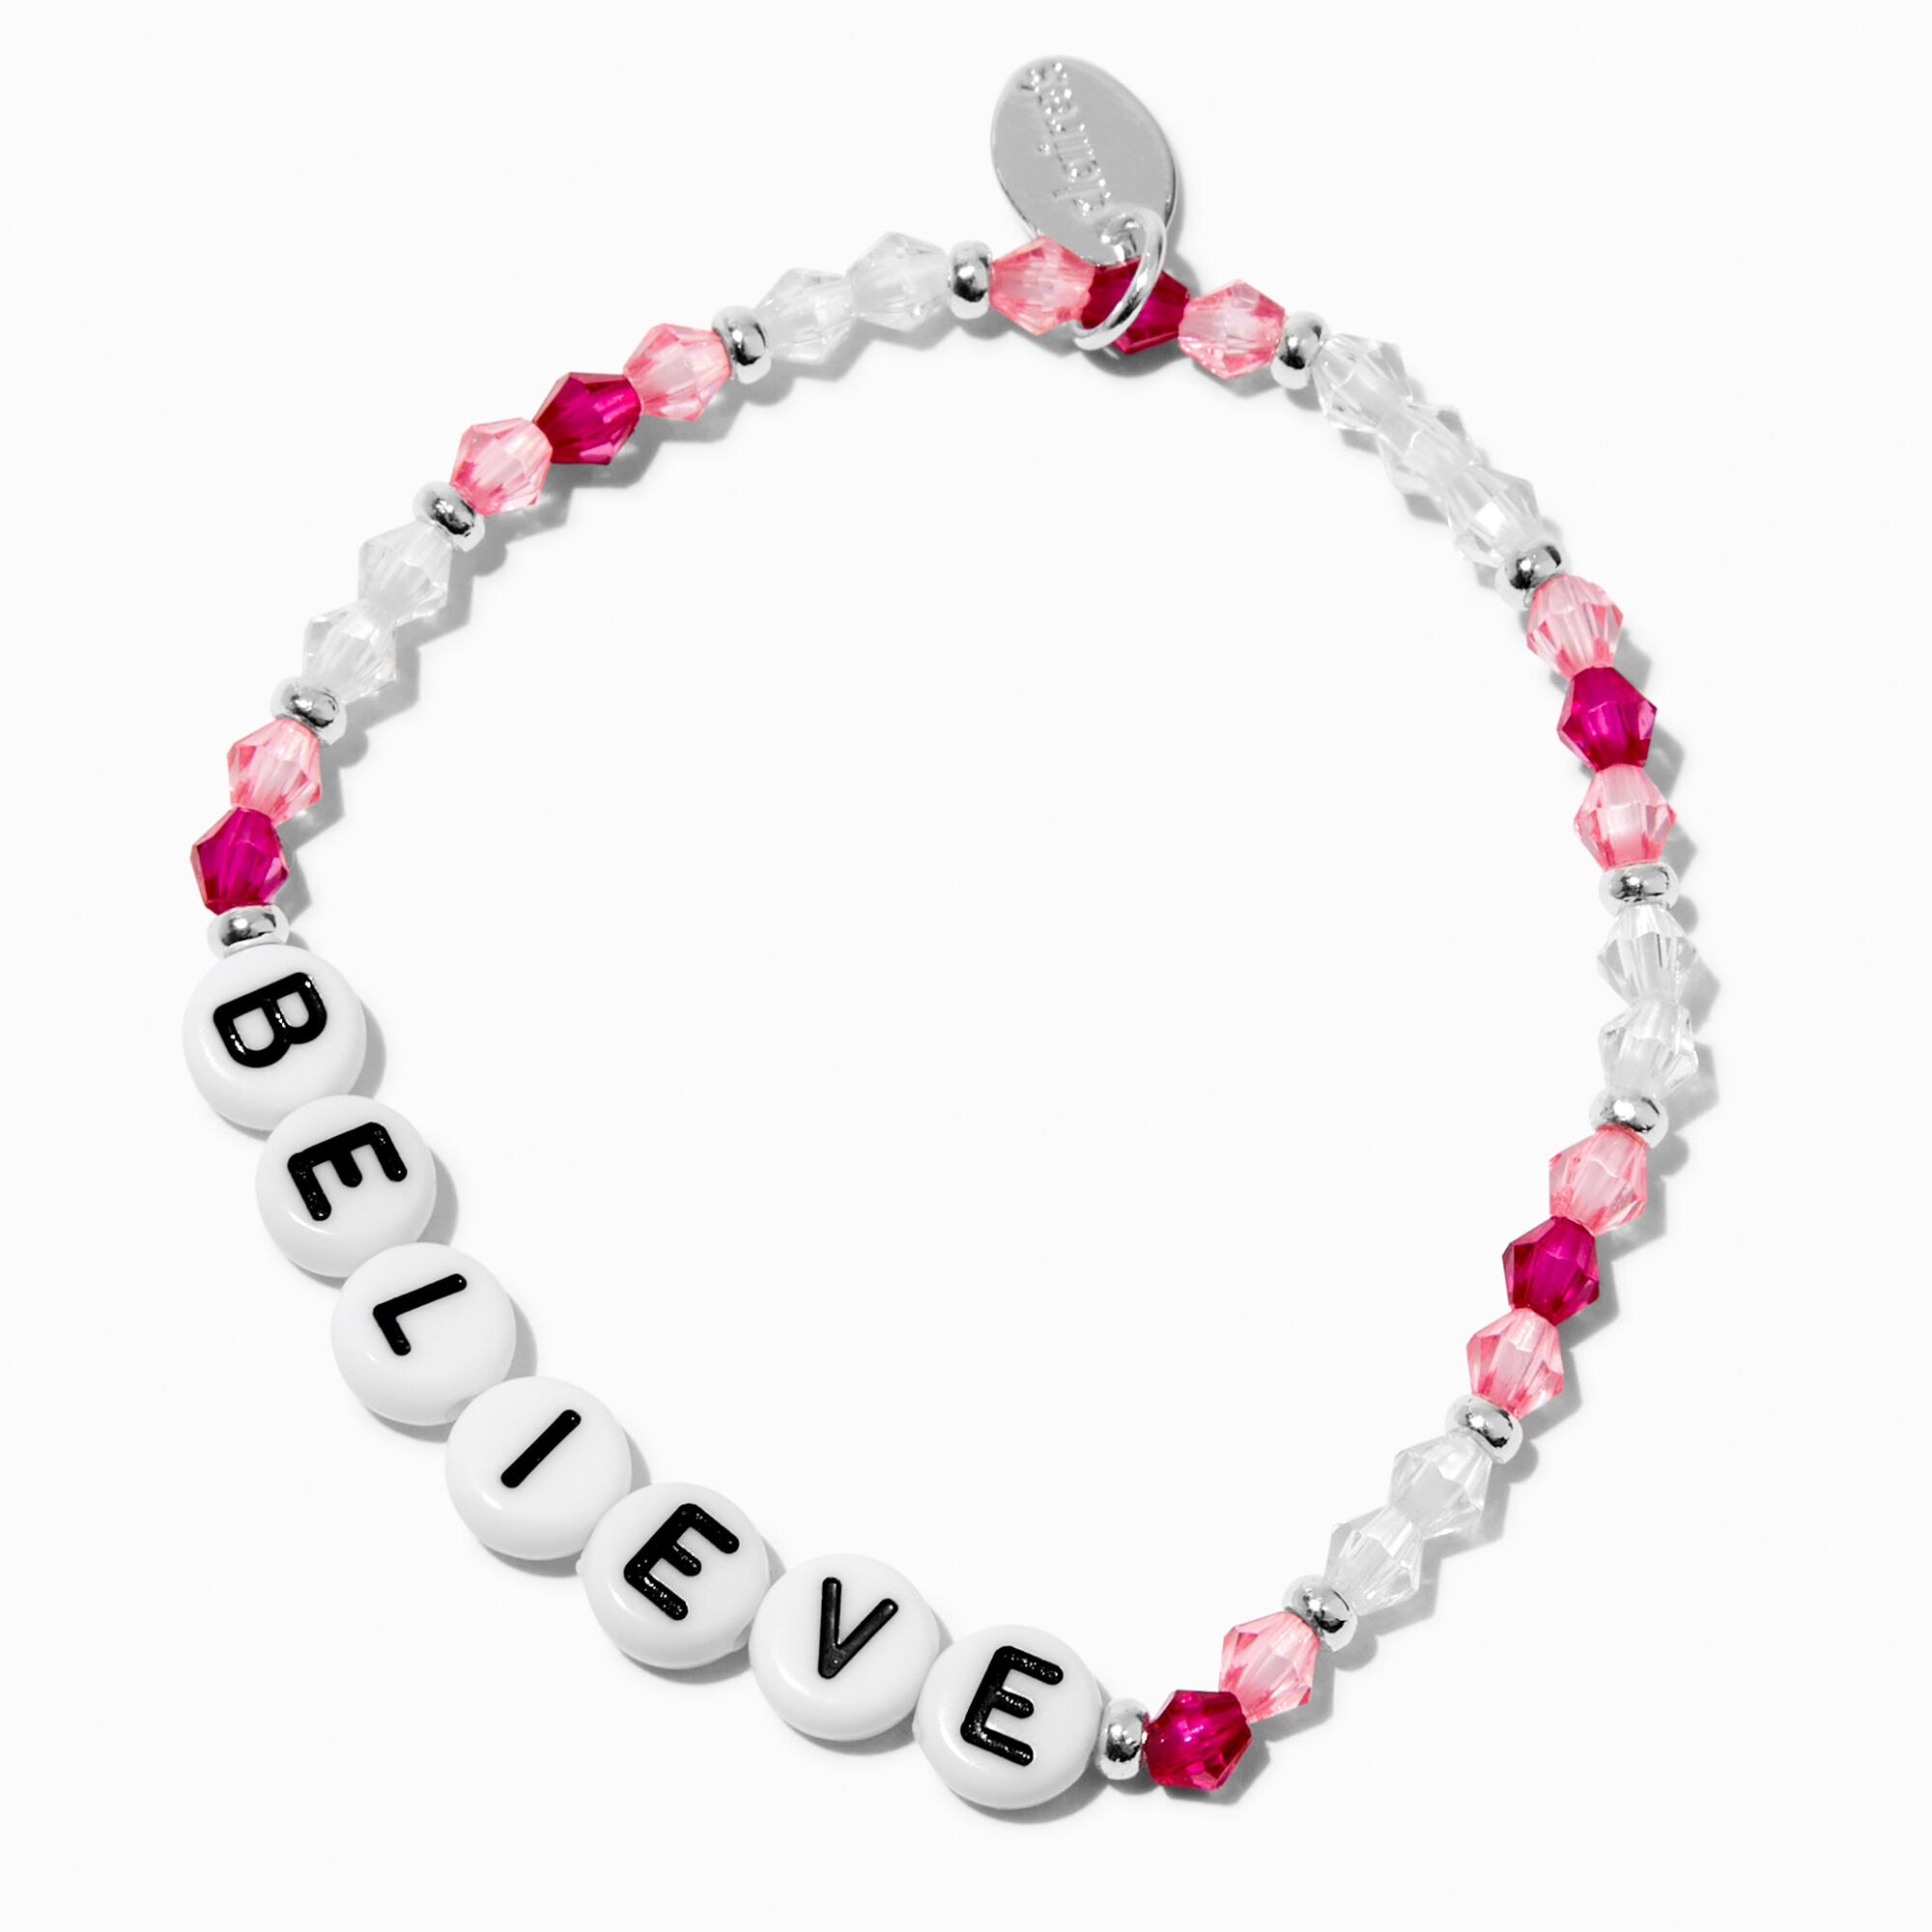 View Claires believe Beaded Stretch Bracelet Pink information